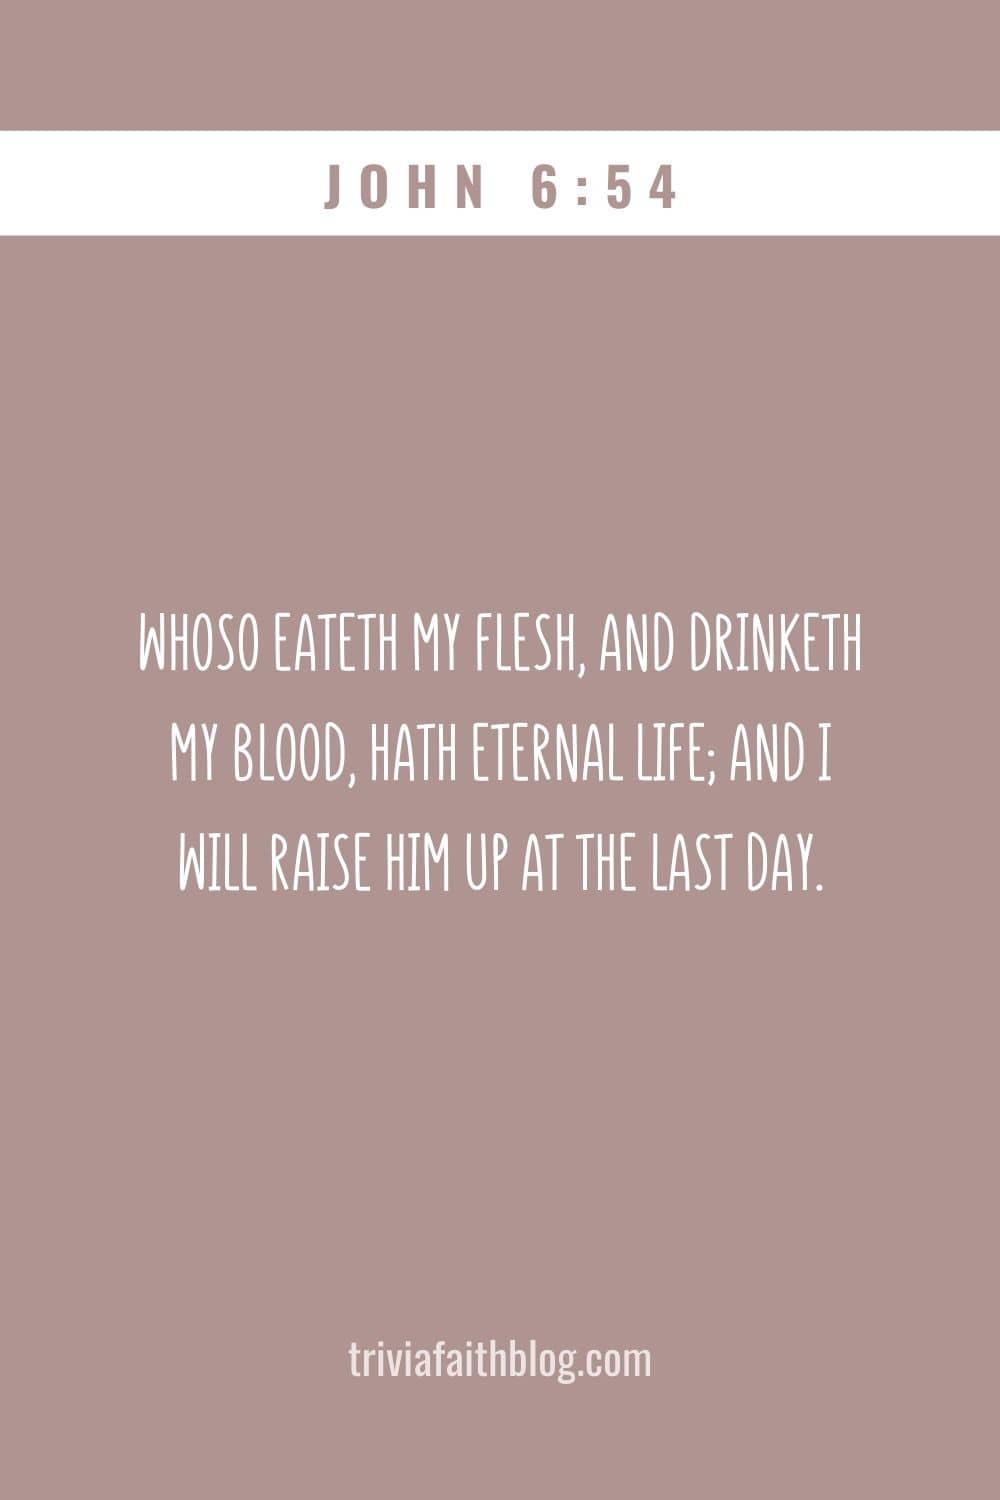 Whoso eateth my flesh, and drinketh my blood, hath eternal life; and I will raise him up at the last day